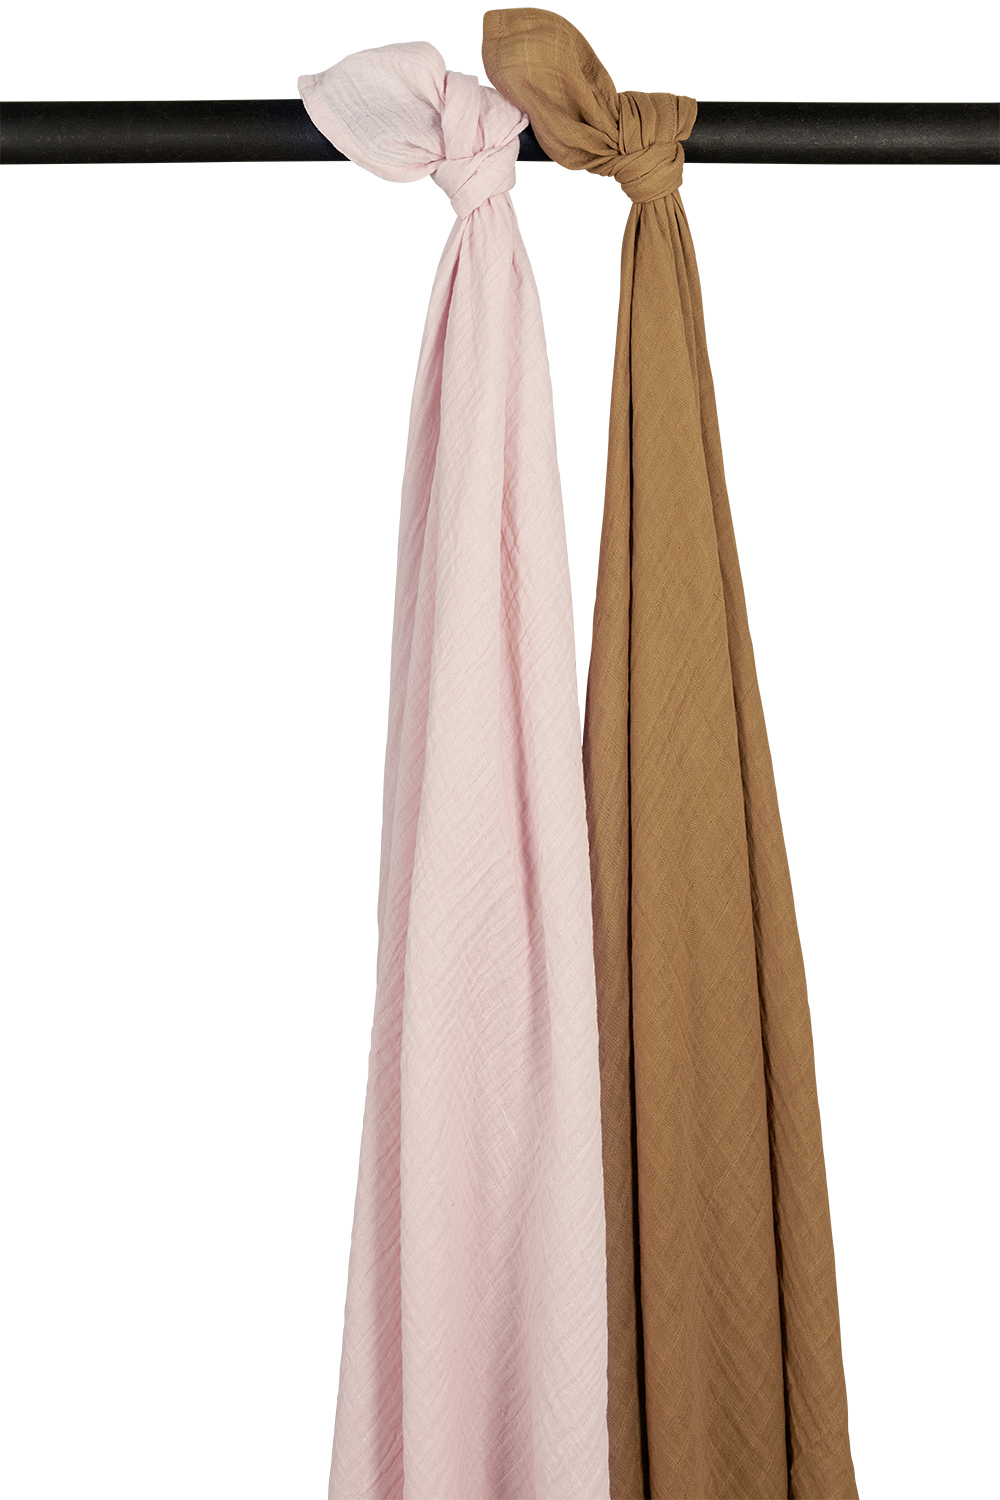 Swaddle  2er pack musselin Uni - soft pink/toffee - 120x120cm